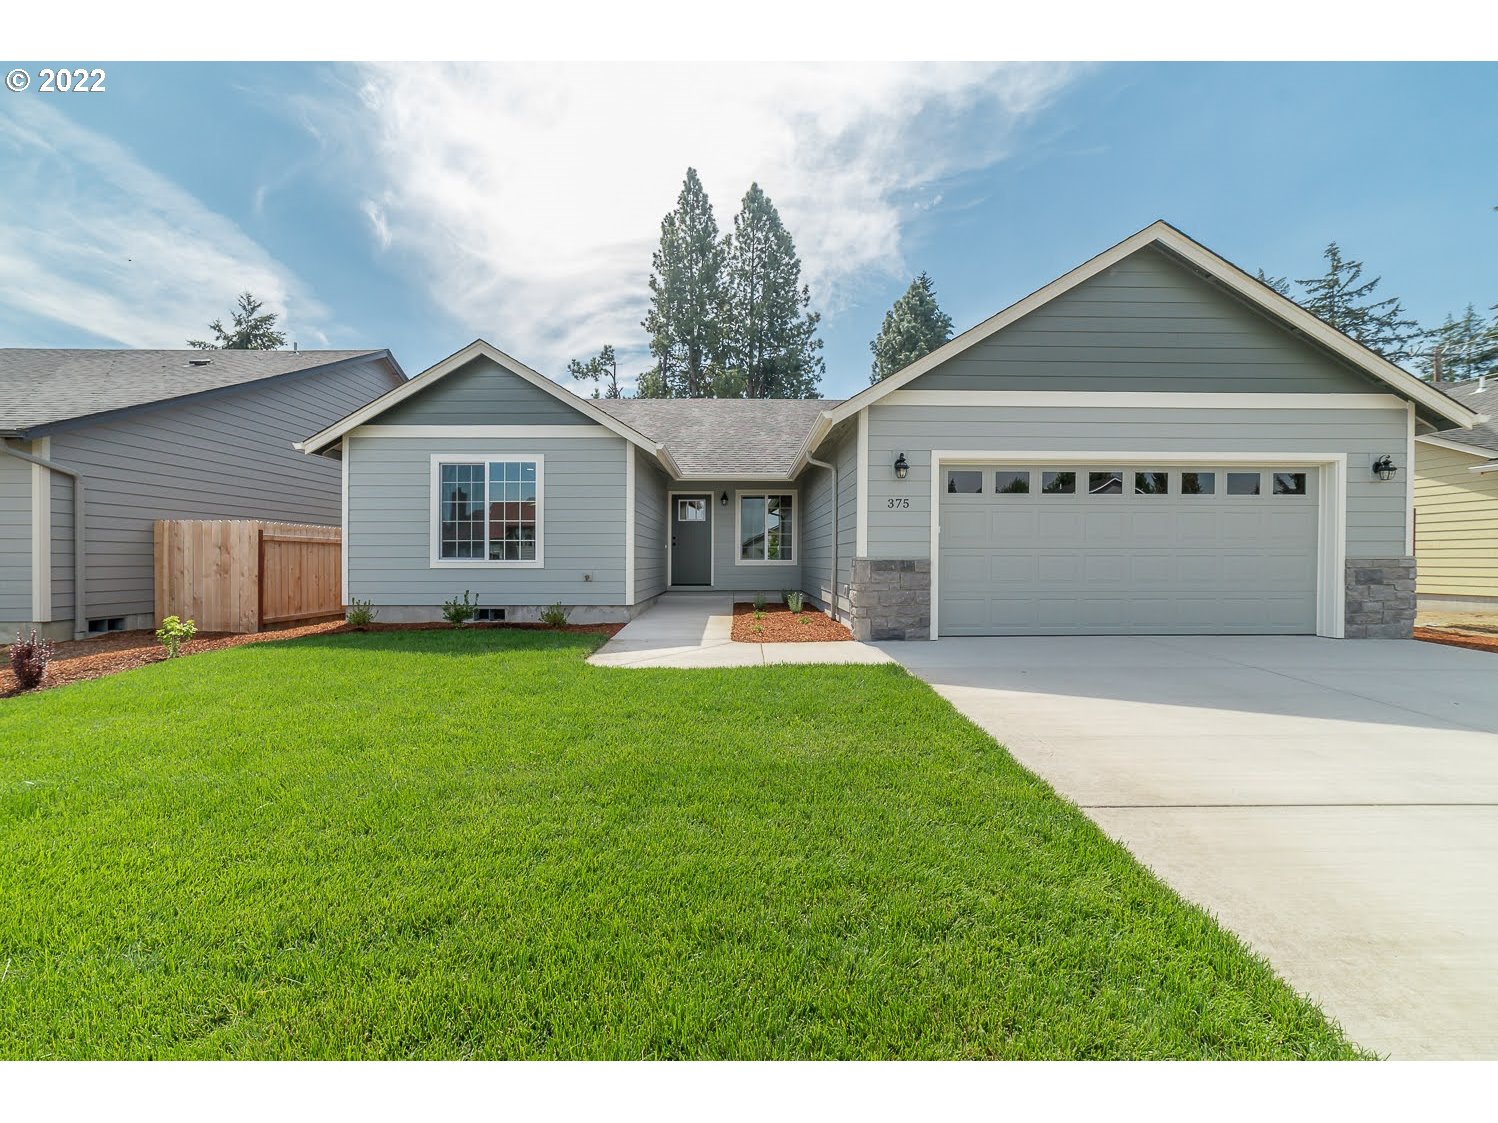 375 OWENS WAY, Creswell, OR 